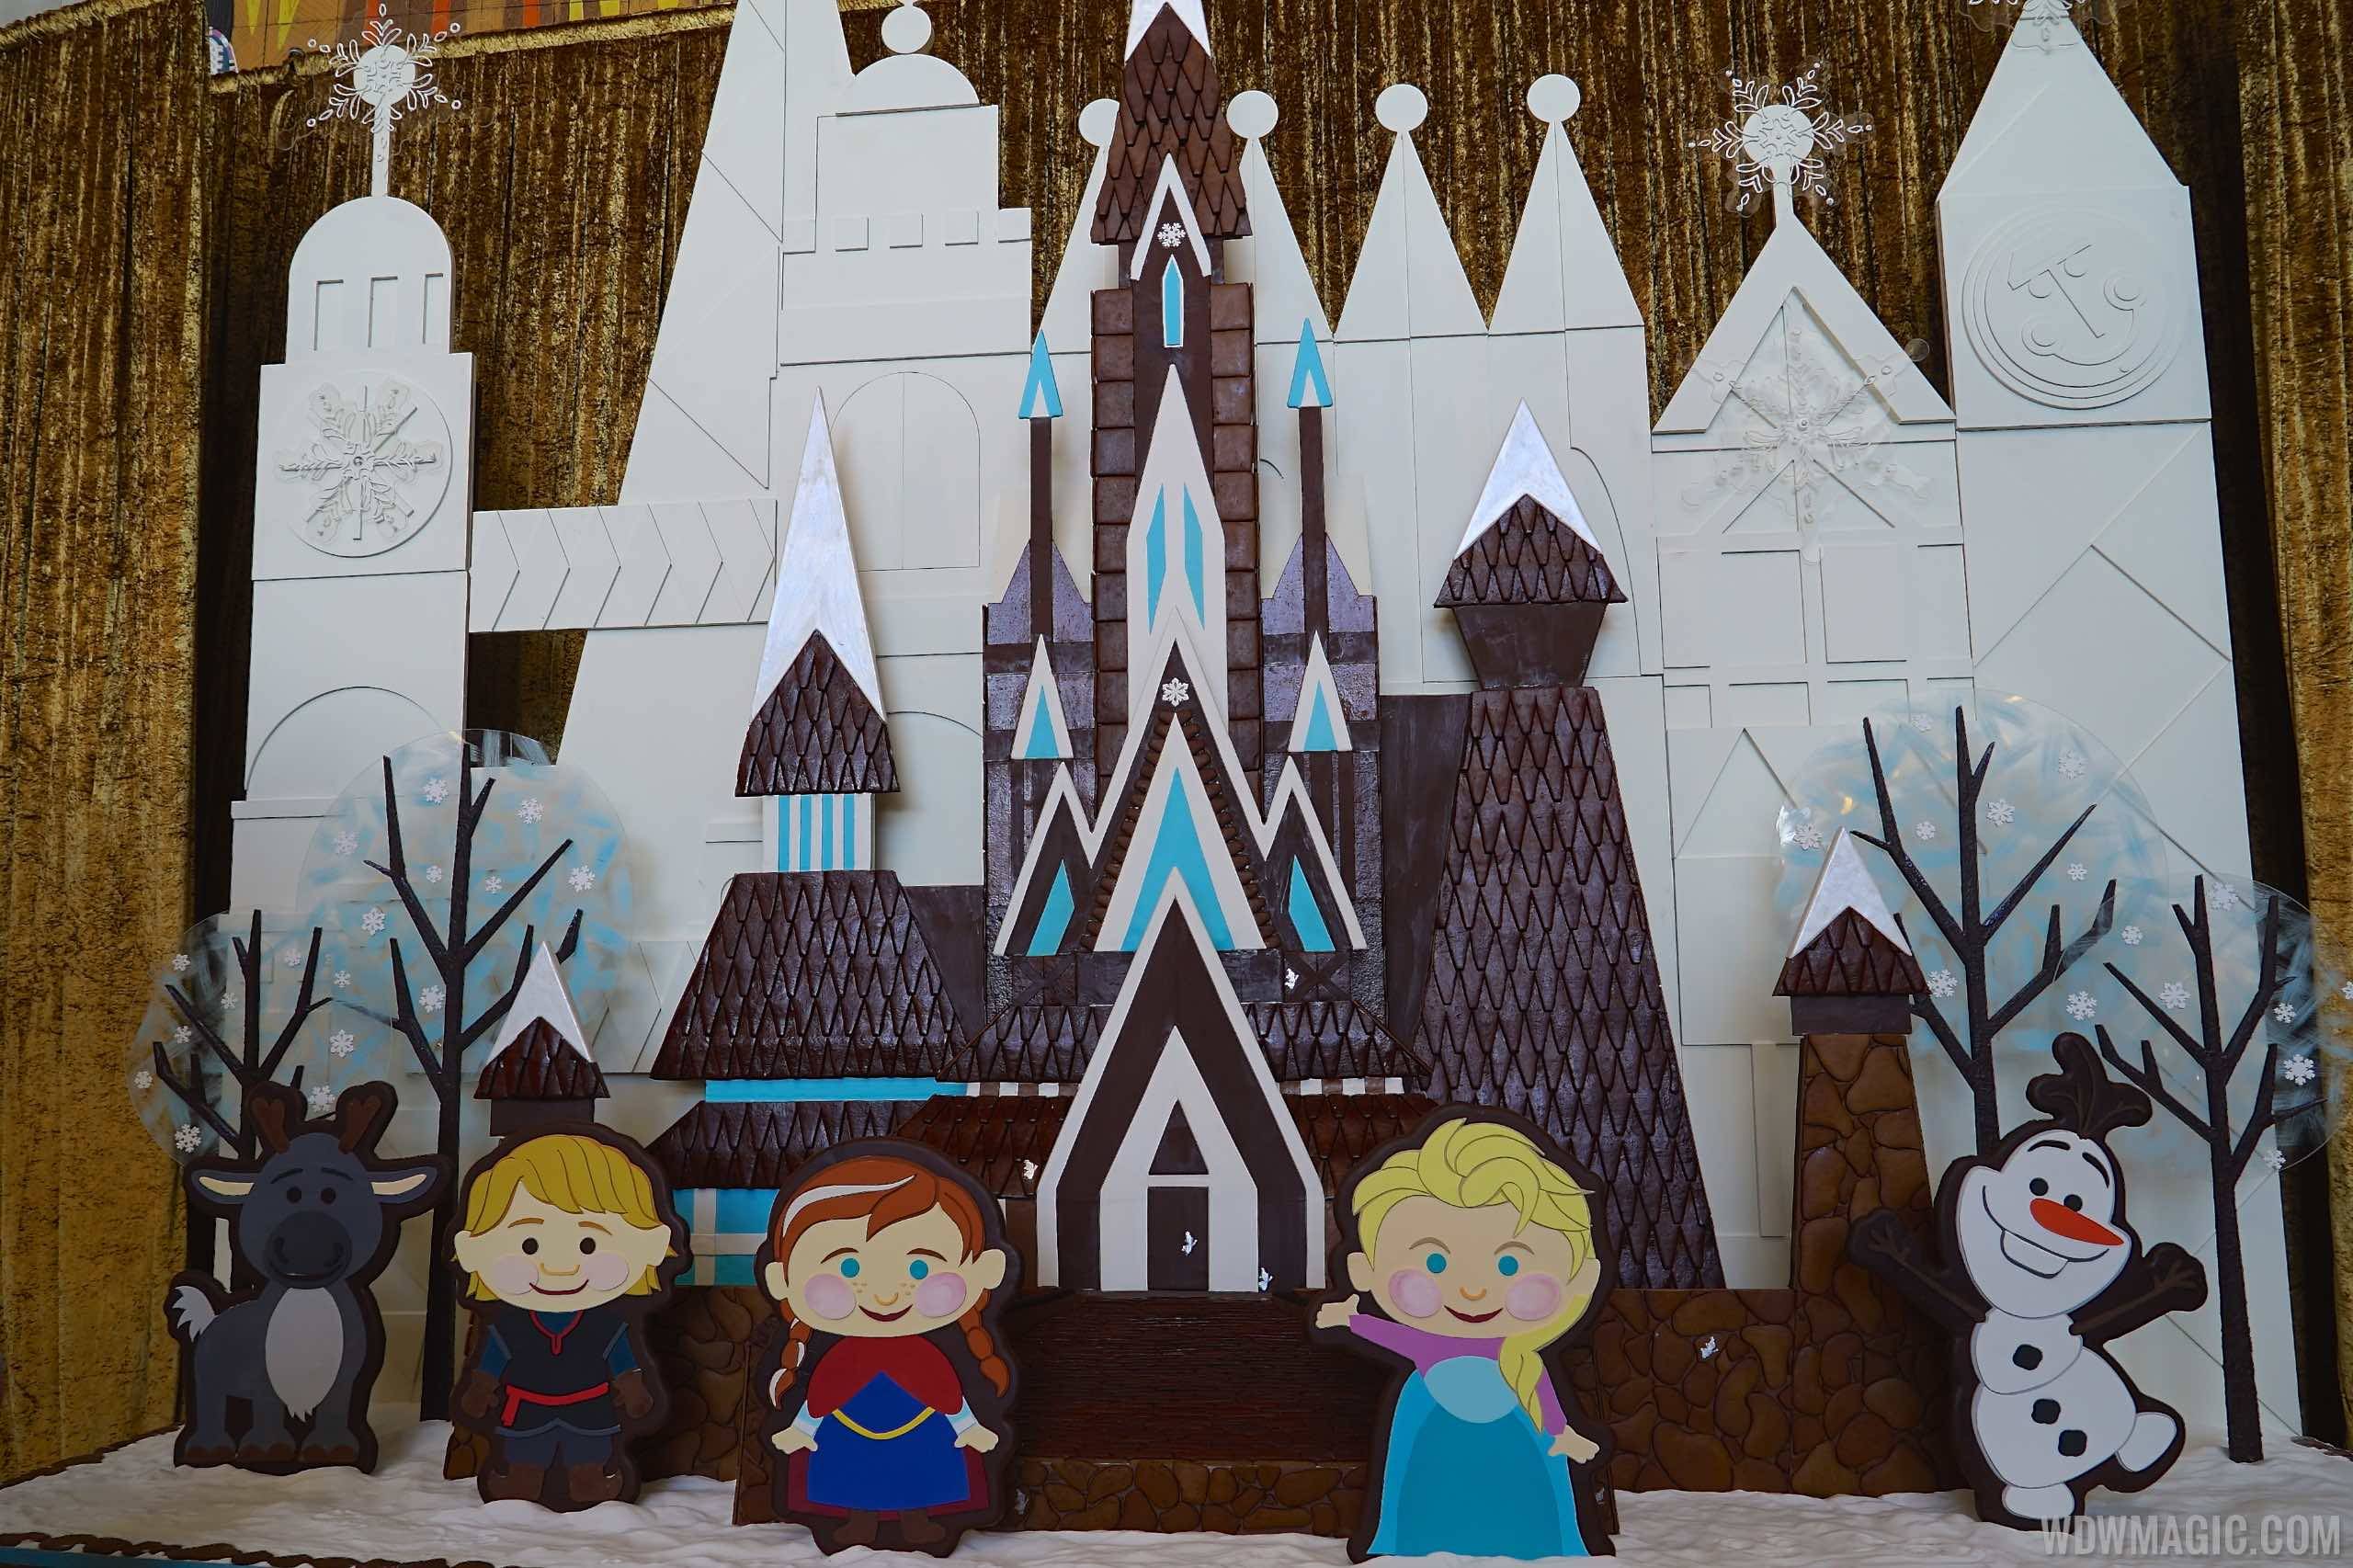 PHOTOS - 'Frozen' inspired Gingerbread display opens at Disney's Contemporary Resort